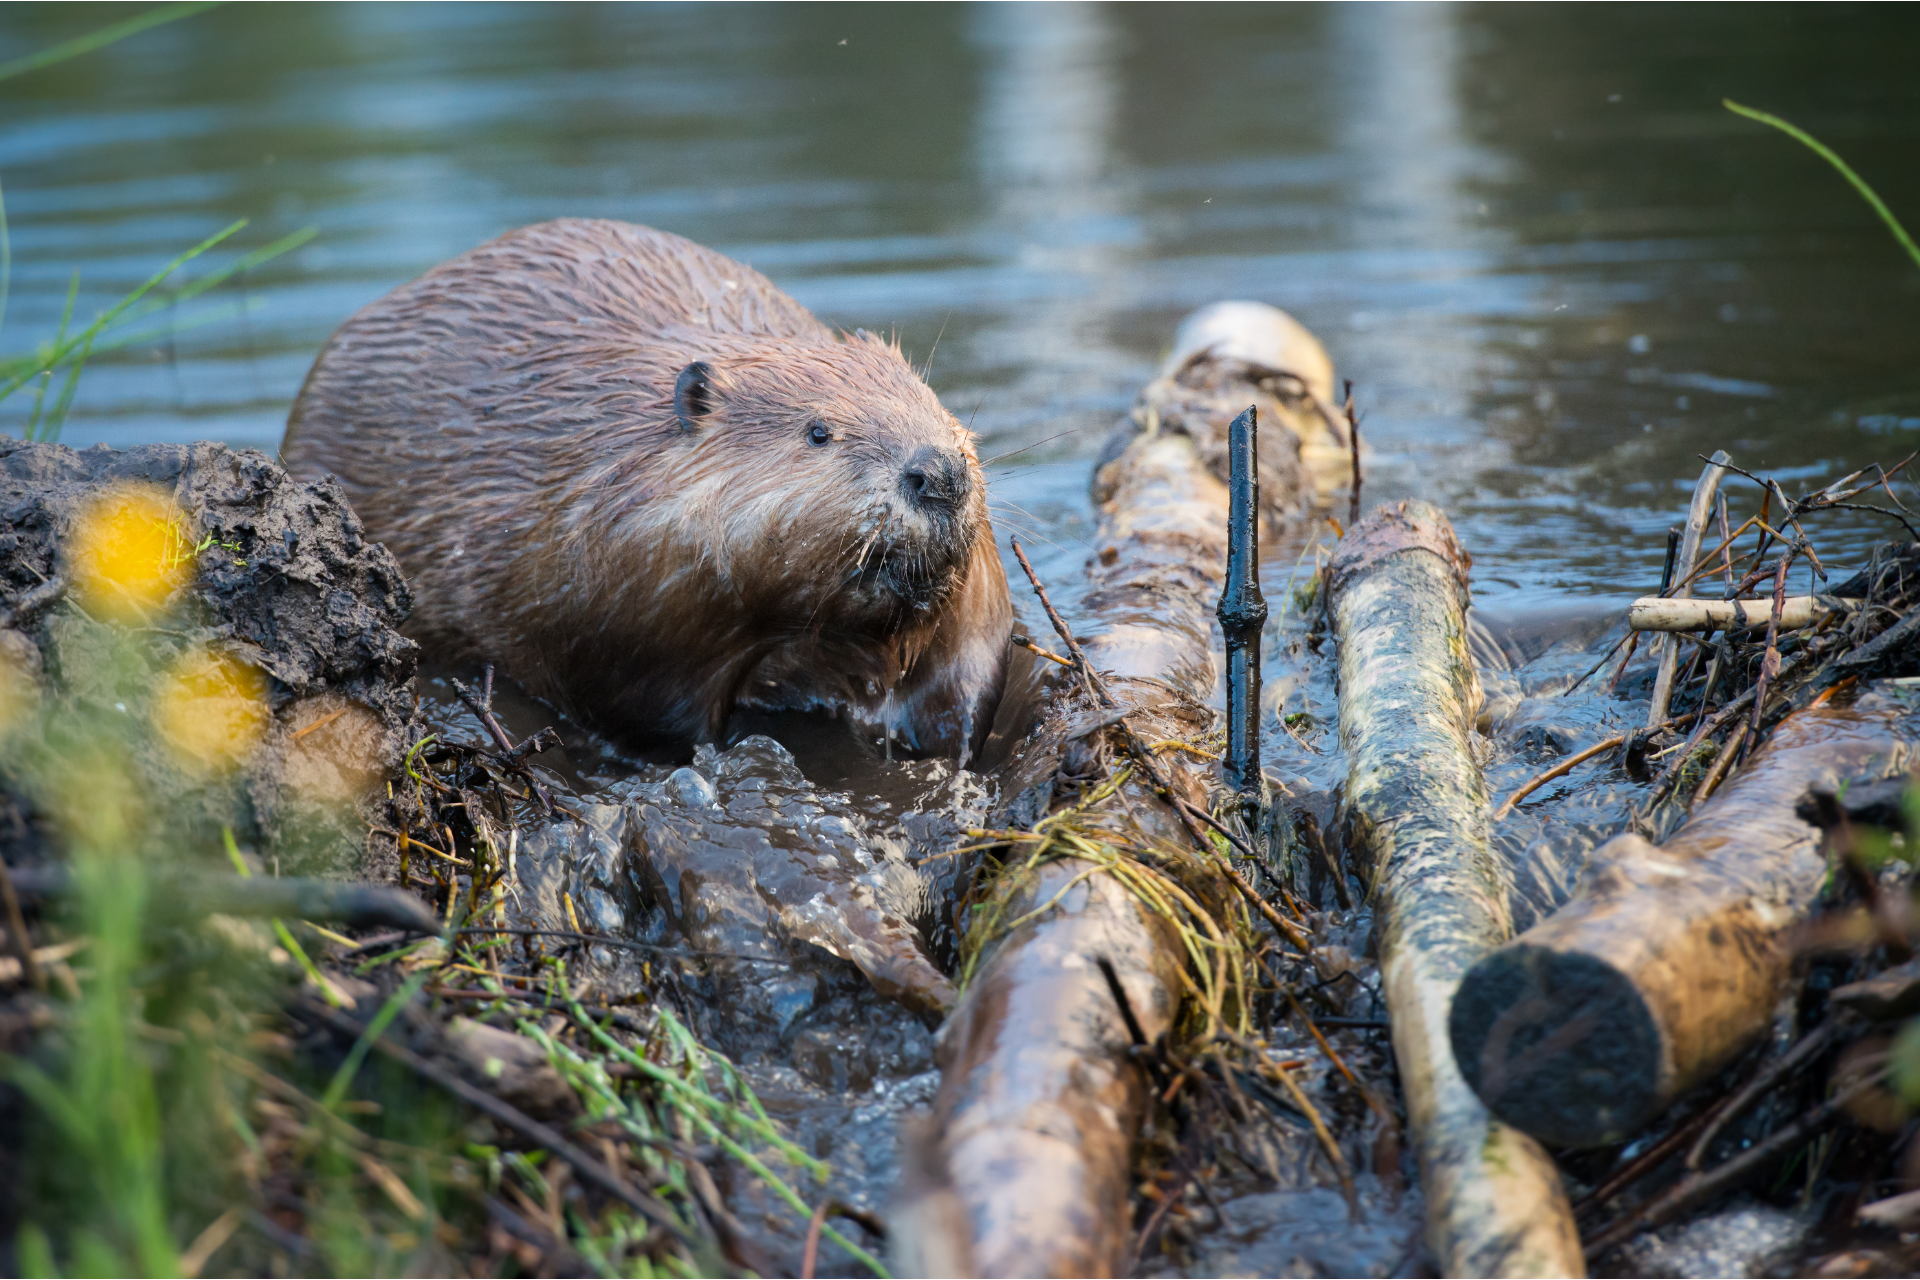 two beavers are standing on a log in the water .